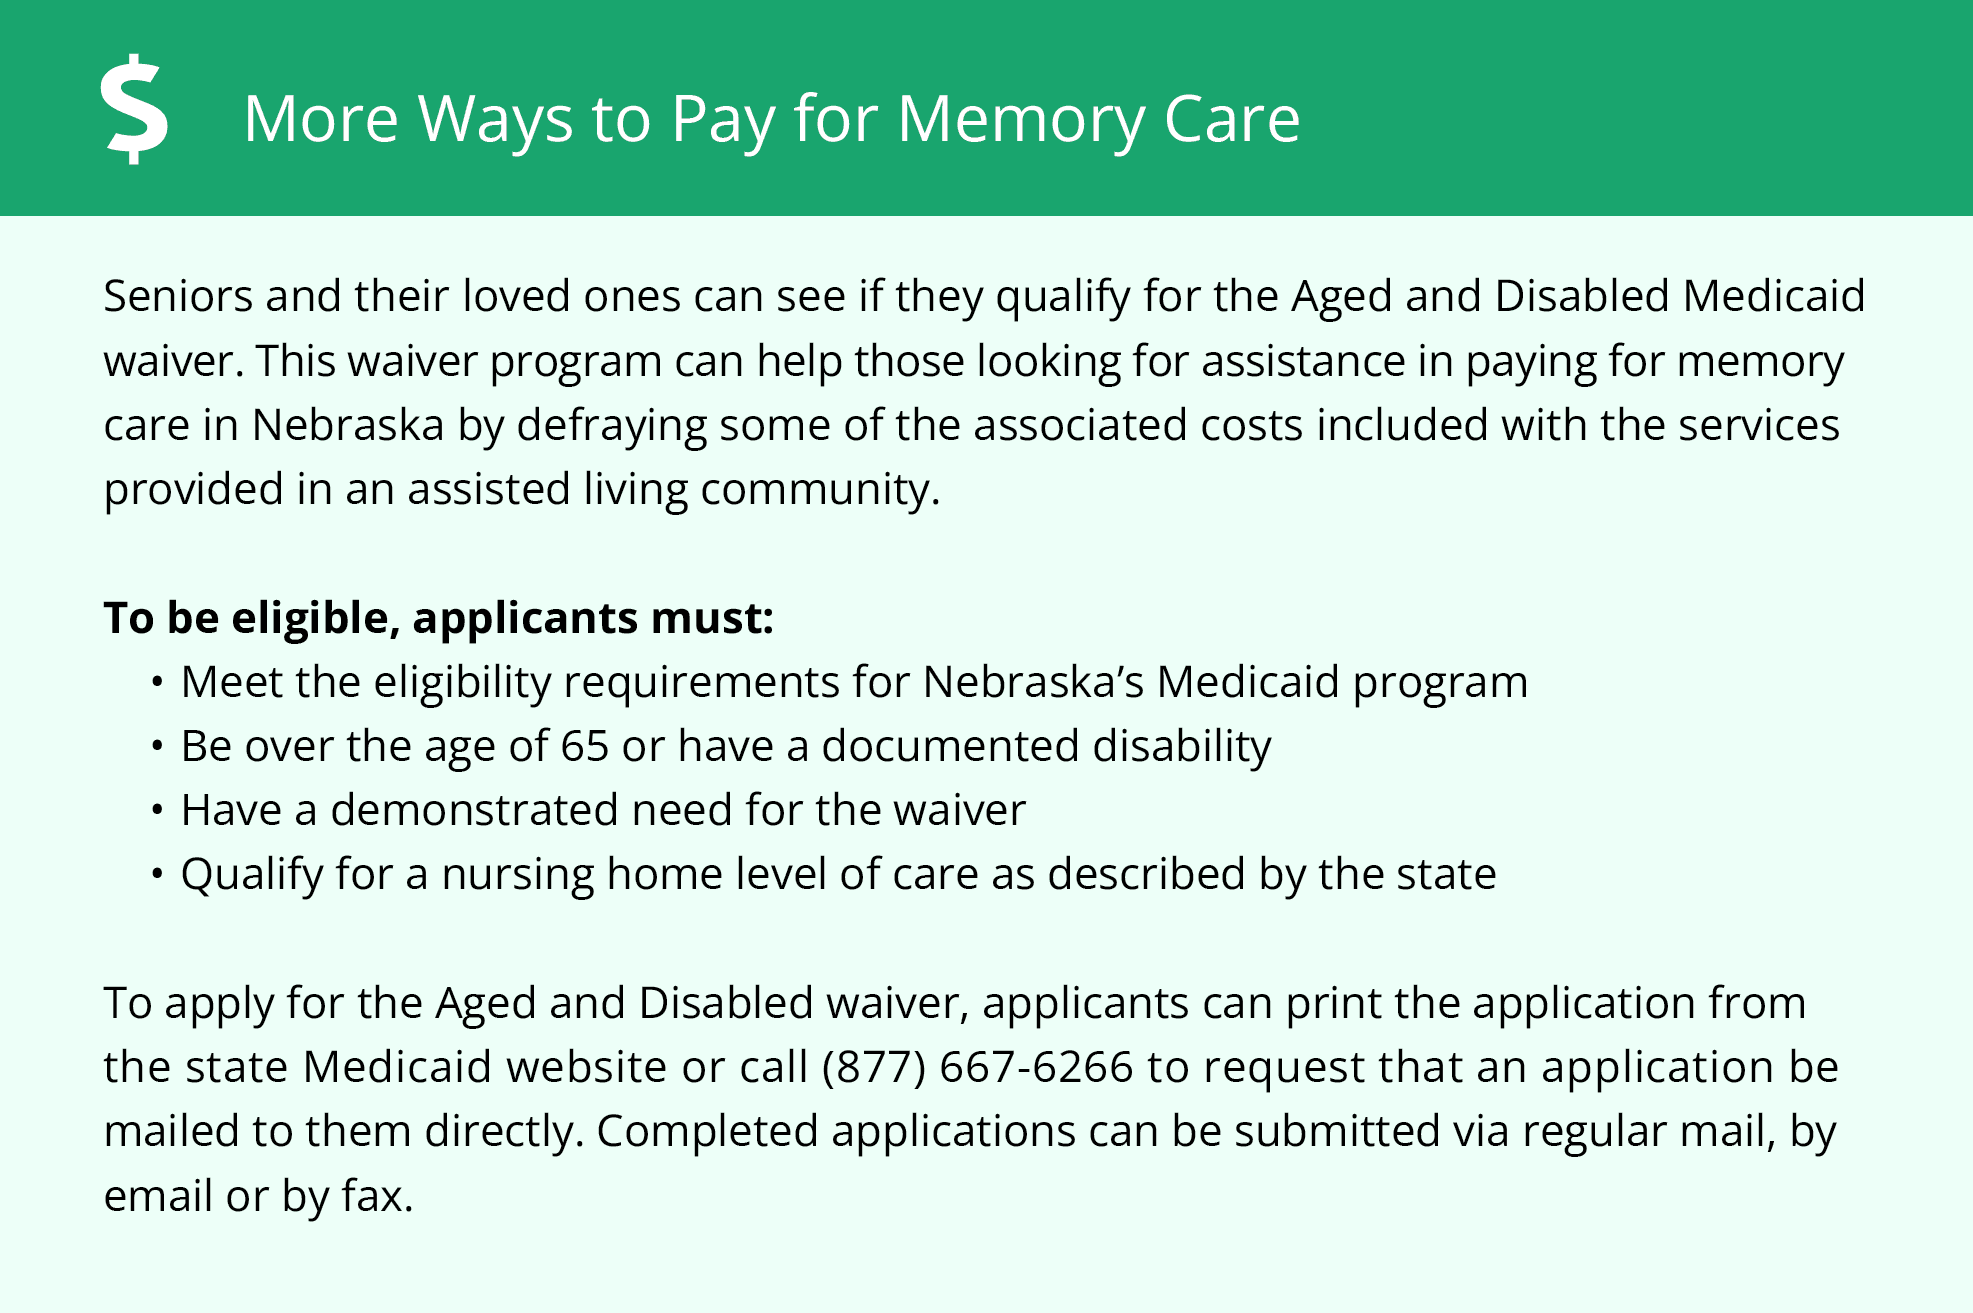 More Ways to Pay for Memory Care in Nebraska